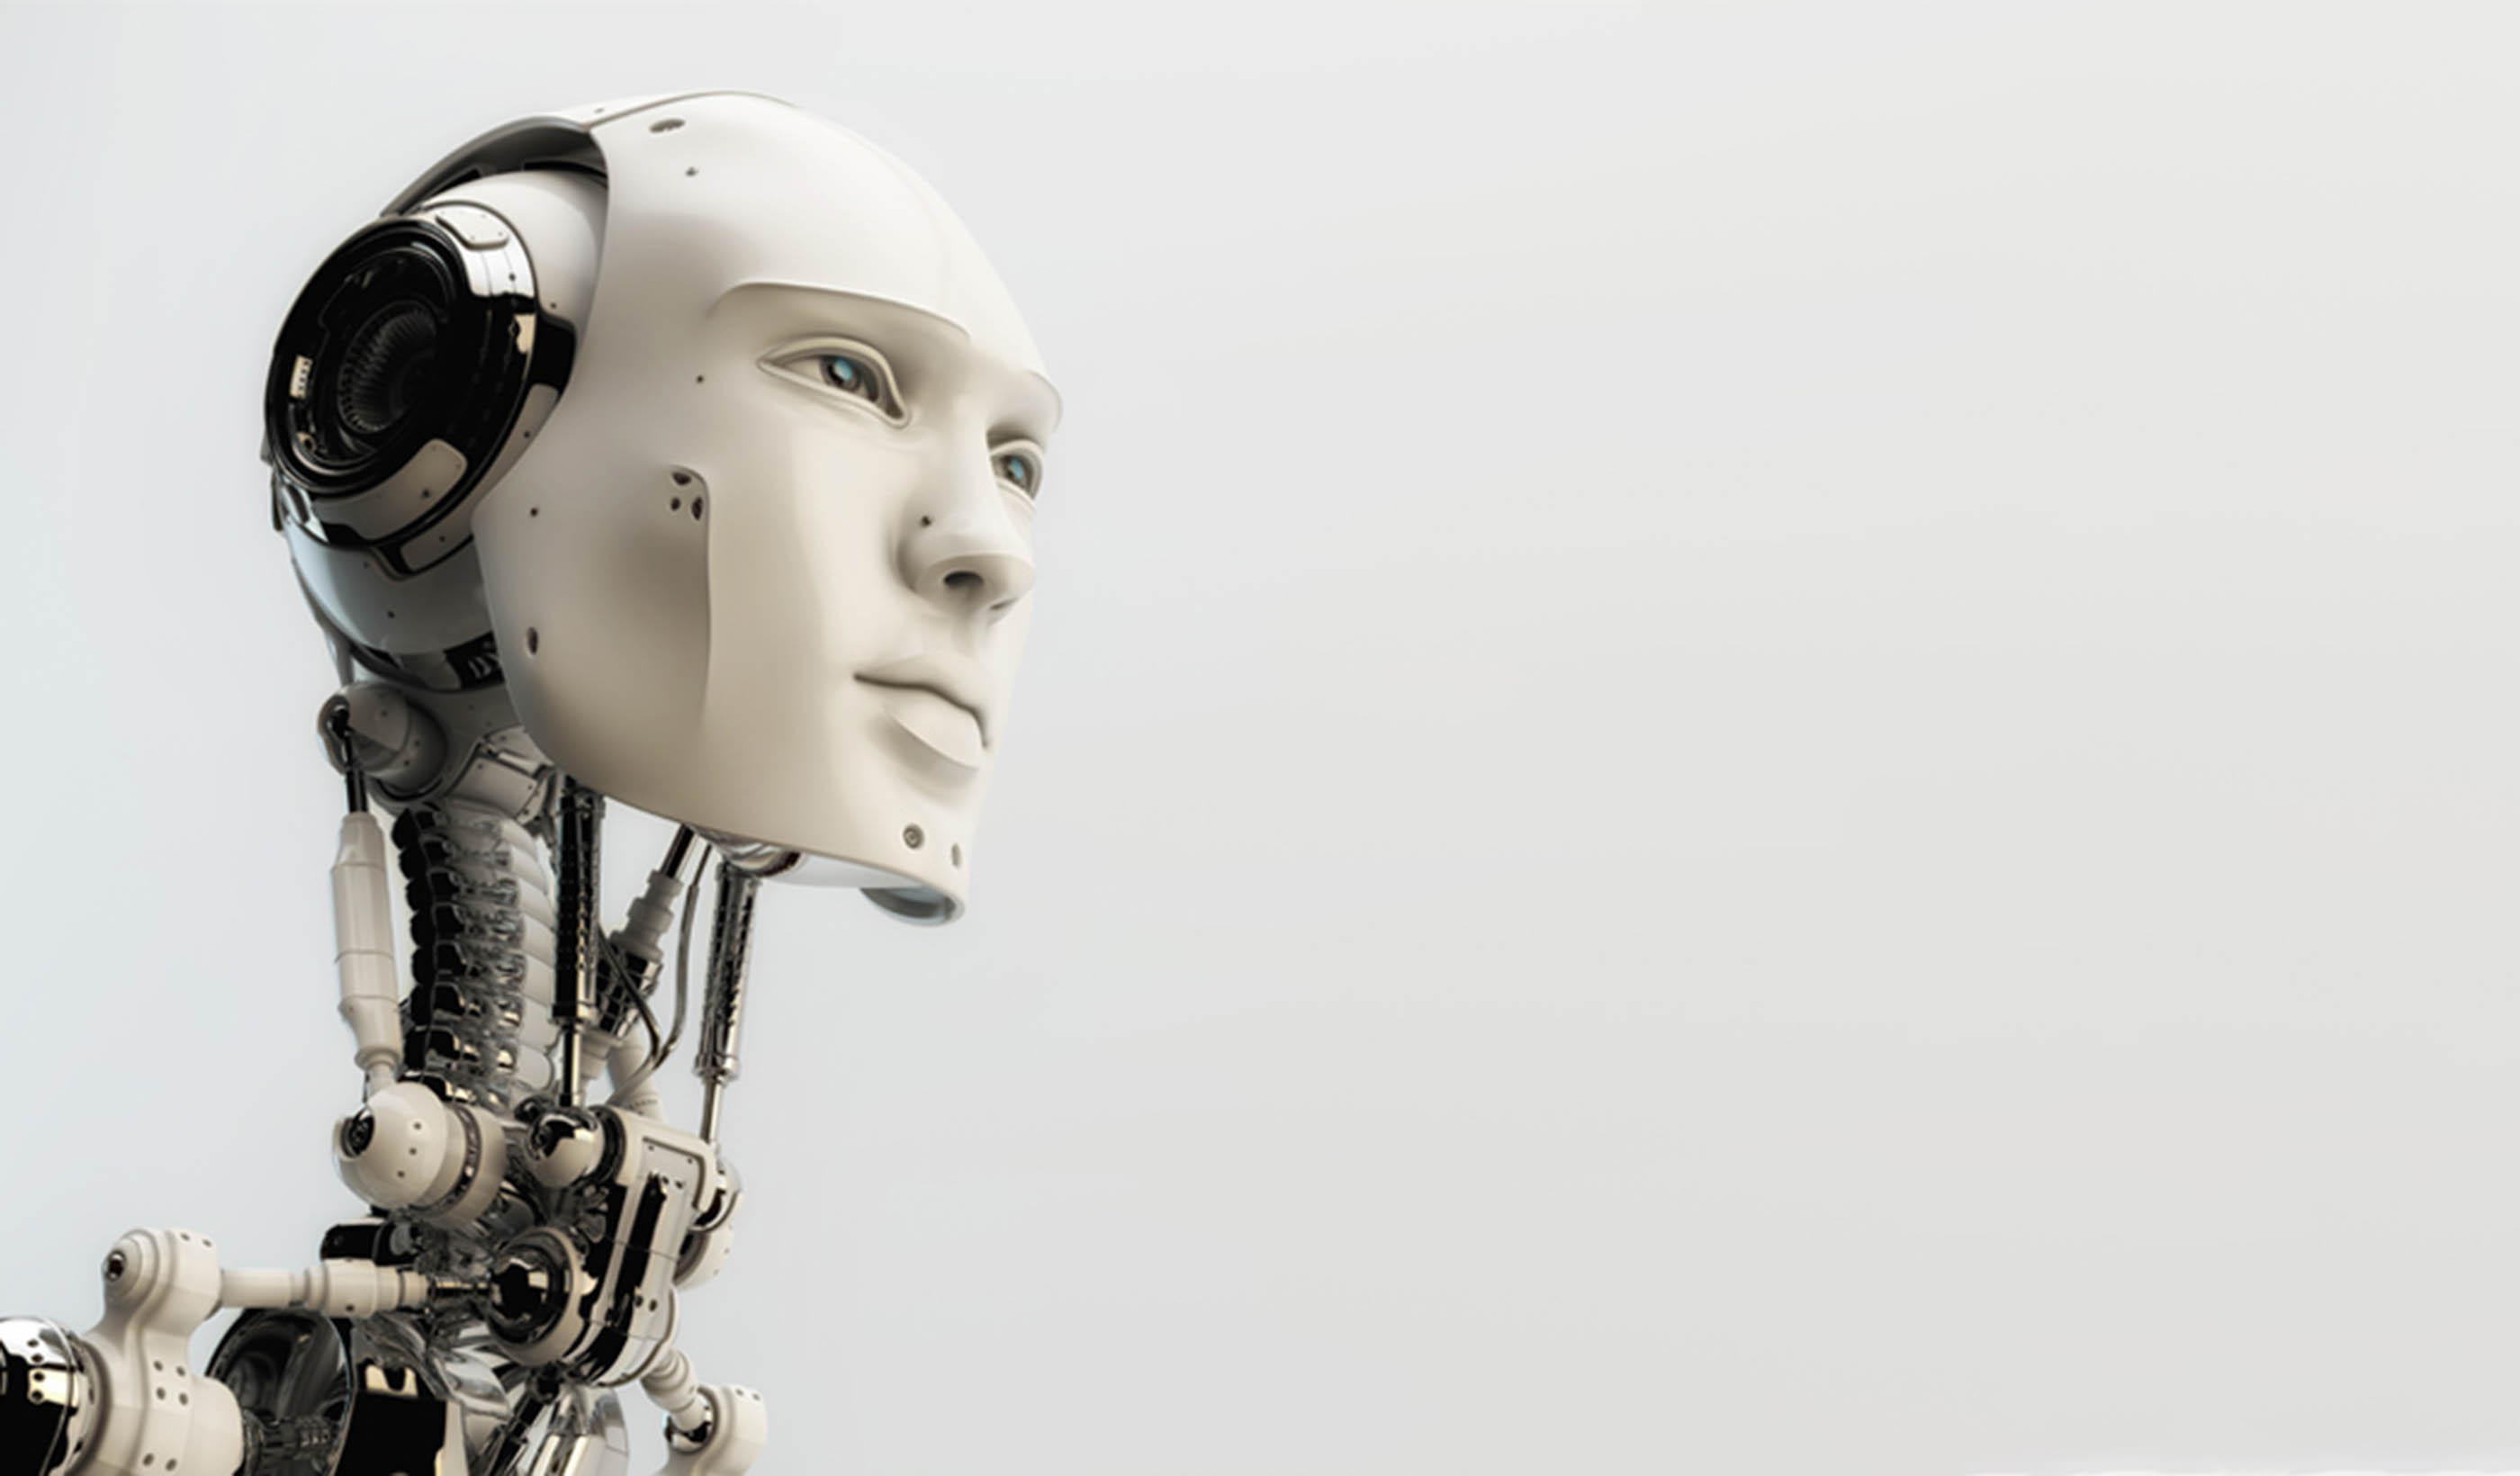 Published on WWT Online: The robots aren't coming... they’re already here